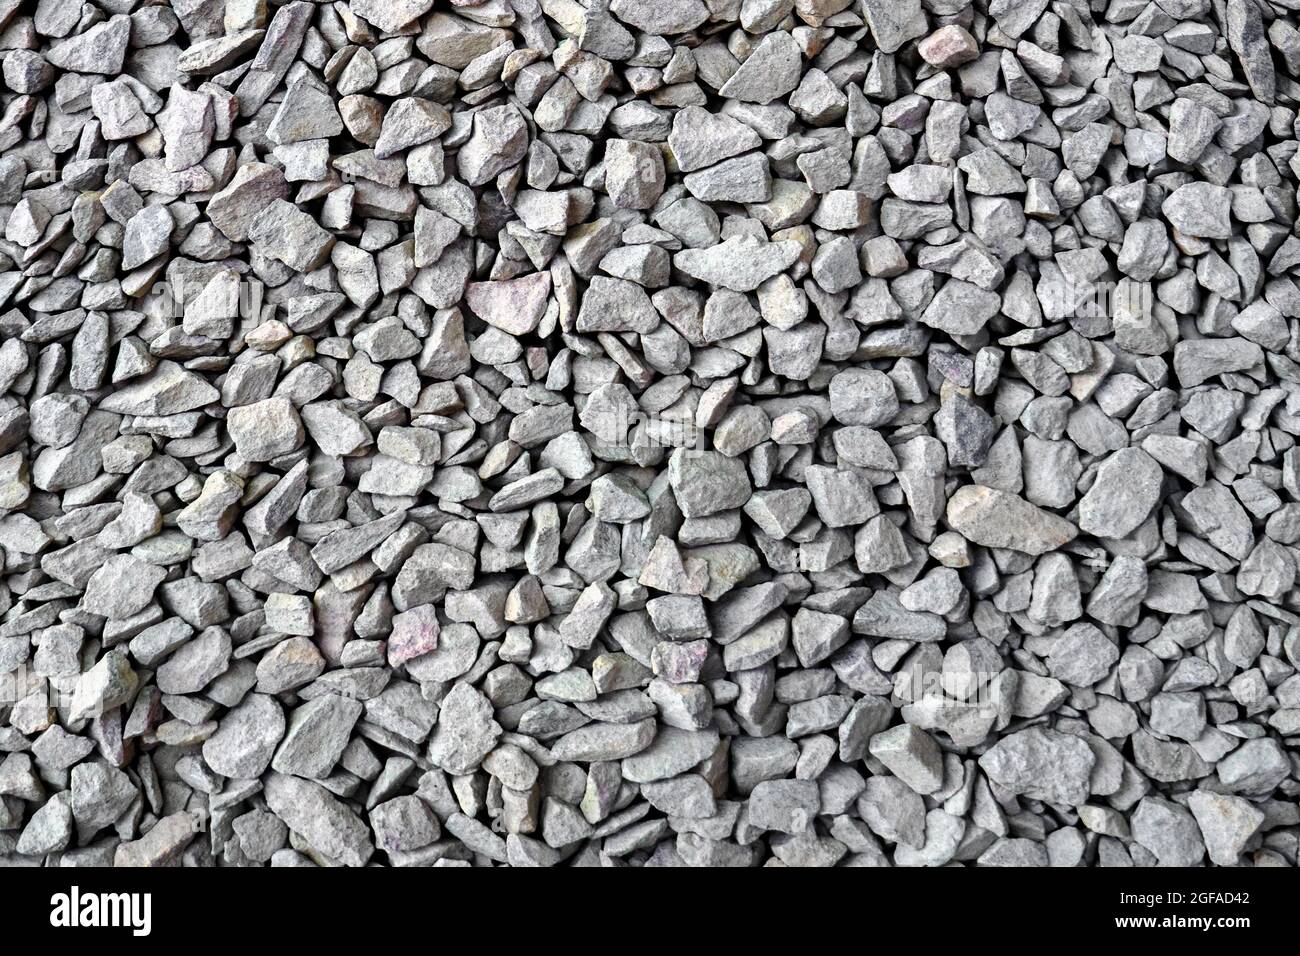 Crushed rock close up. Small rocks ground. Crushed stone road building material gravel texture. Small stone construction material rock. Garden gravel Stock Photo